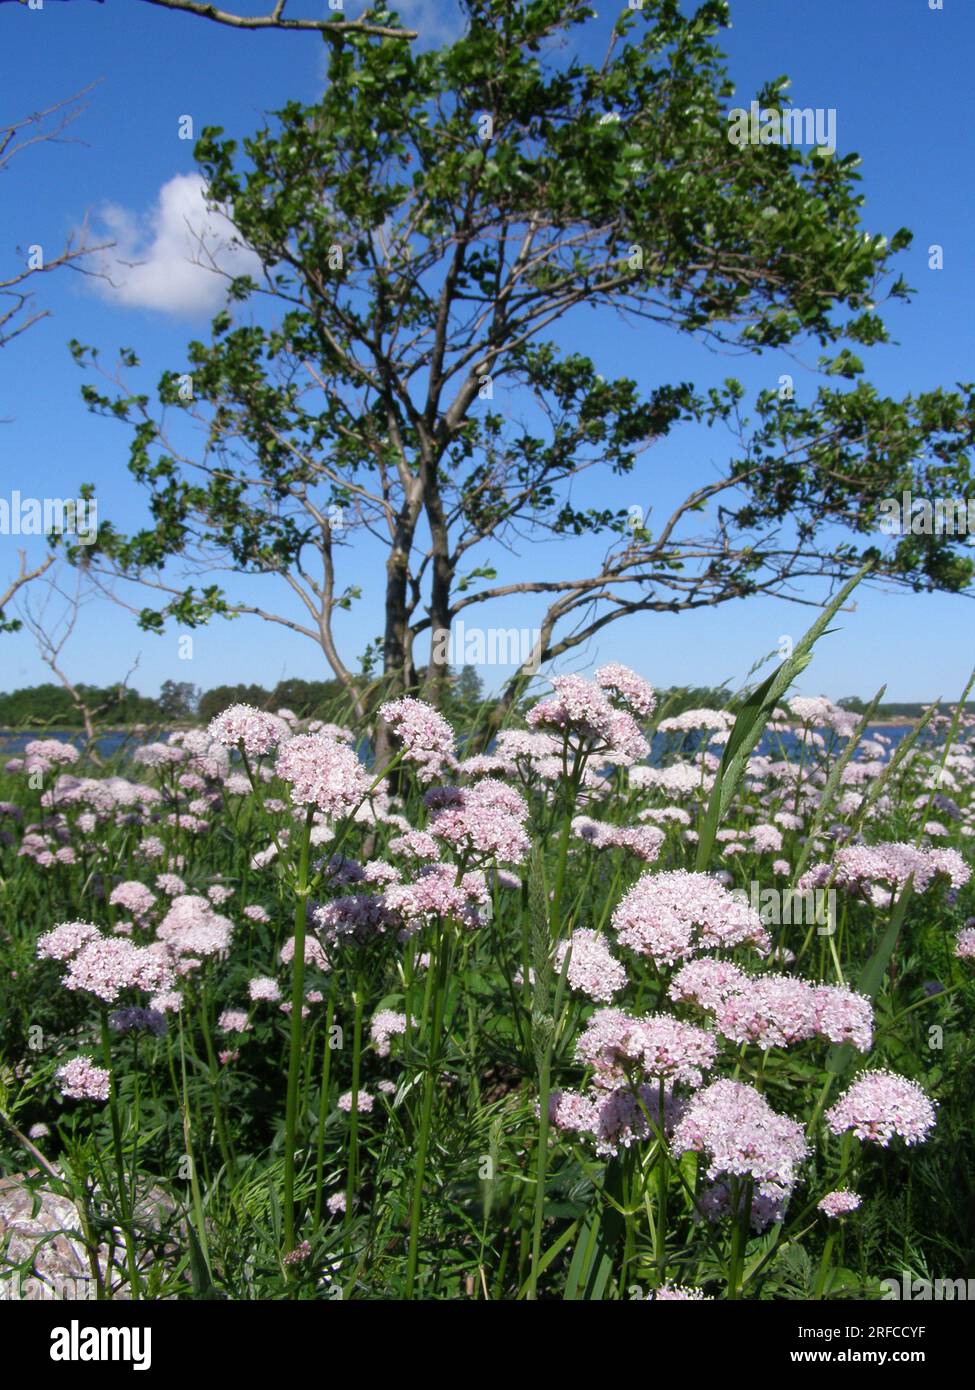 The Heliotrope elder-leaved (Valeriana sambucifolia) grows on the boulder beach of the island in the eastern freshwater part of the Gulf of Finland. B Stock Photo